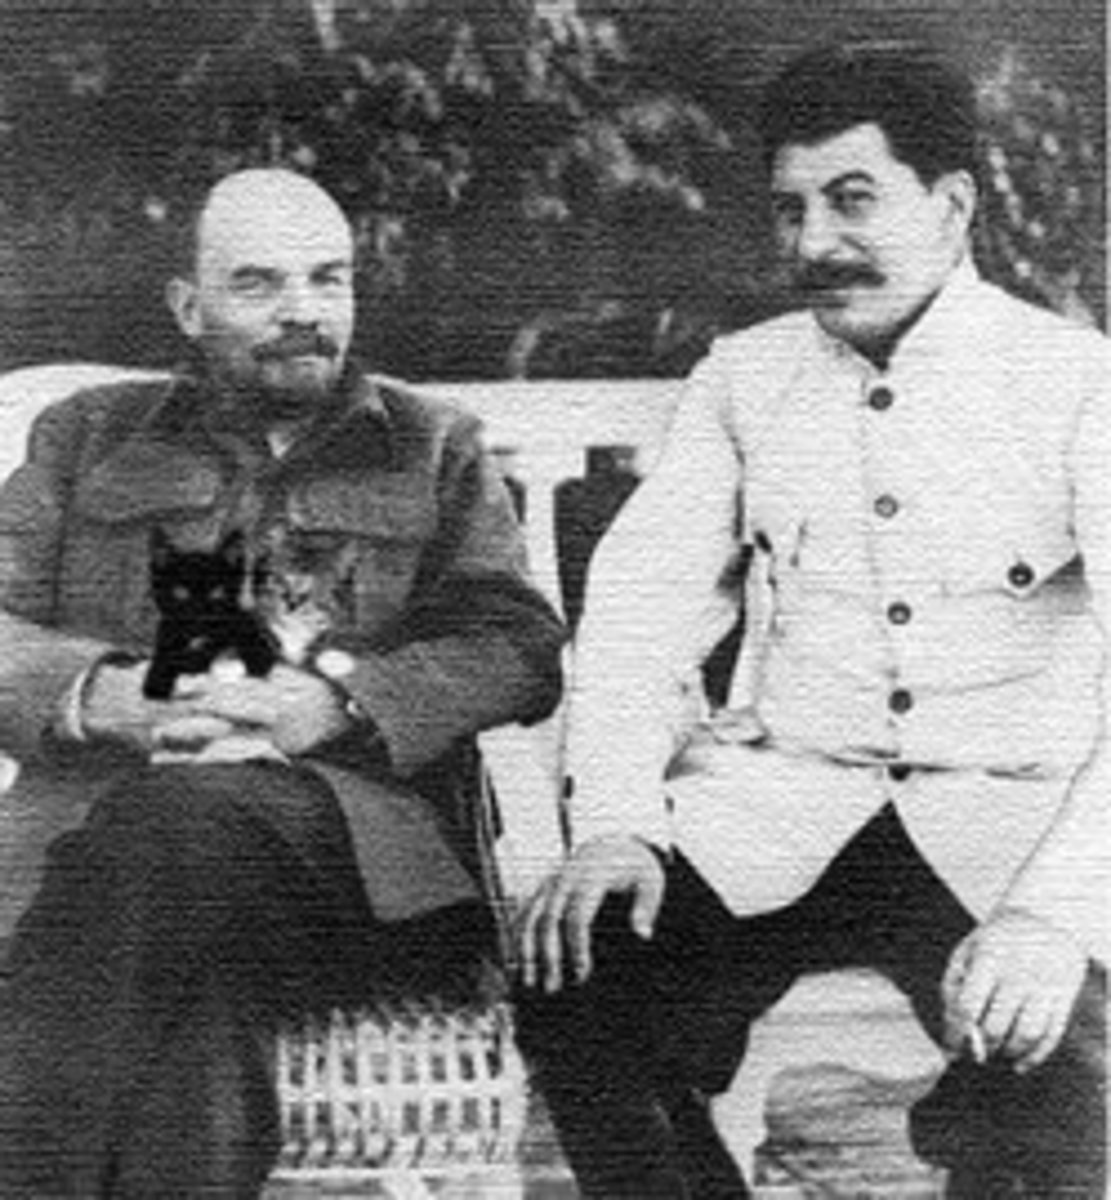 Lenin, kittens, and Stalin, no less. Painting the leaders of the USSR as monsters has long been a staple of anticommunist propaganda.